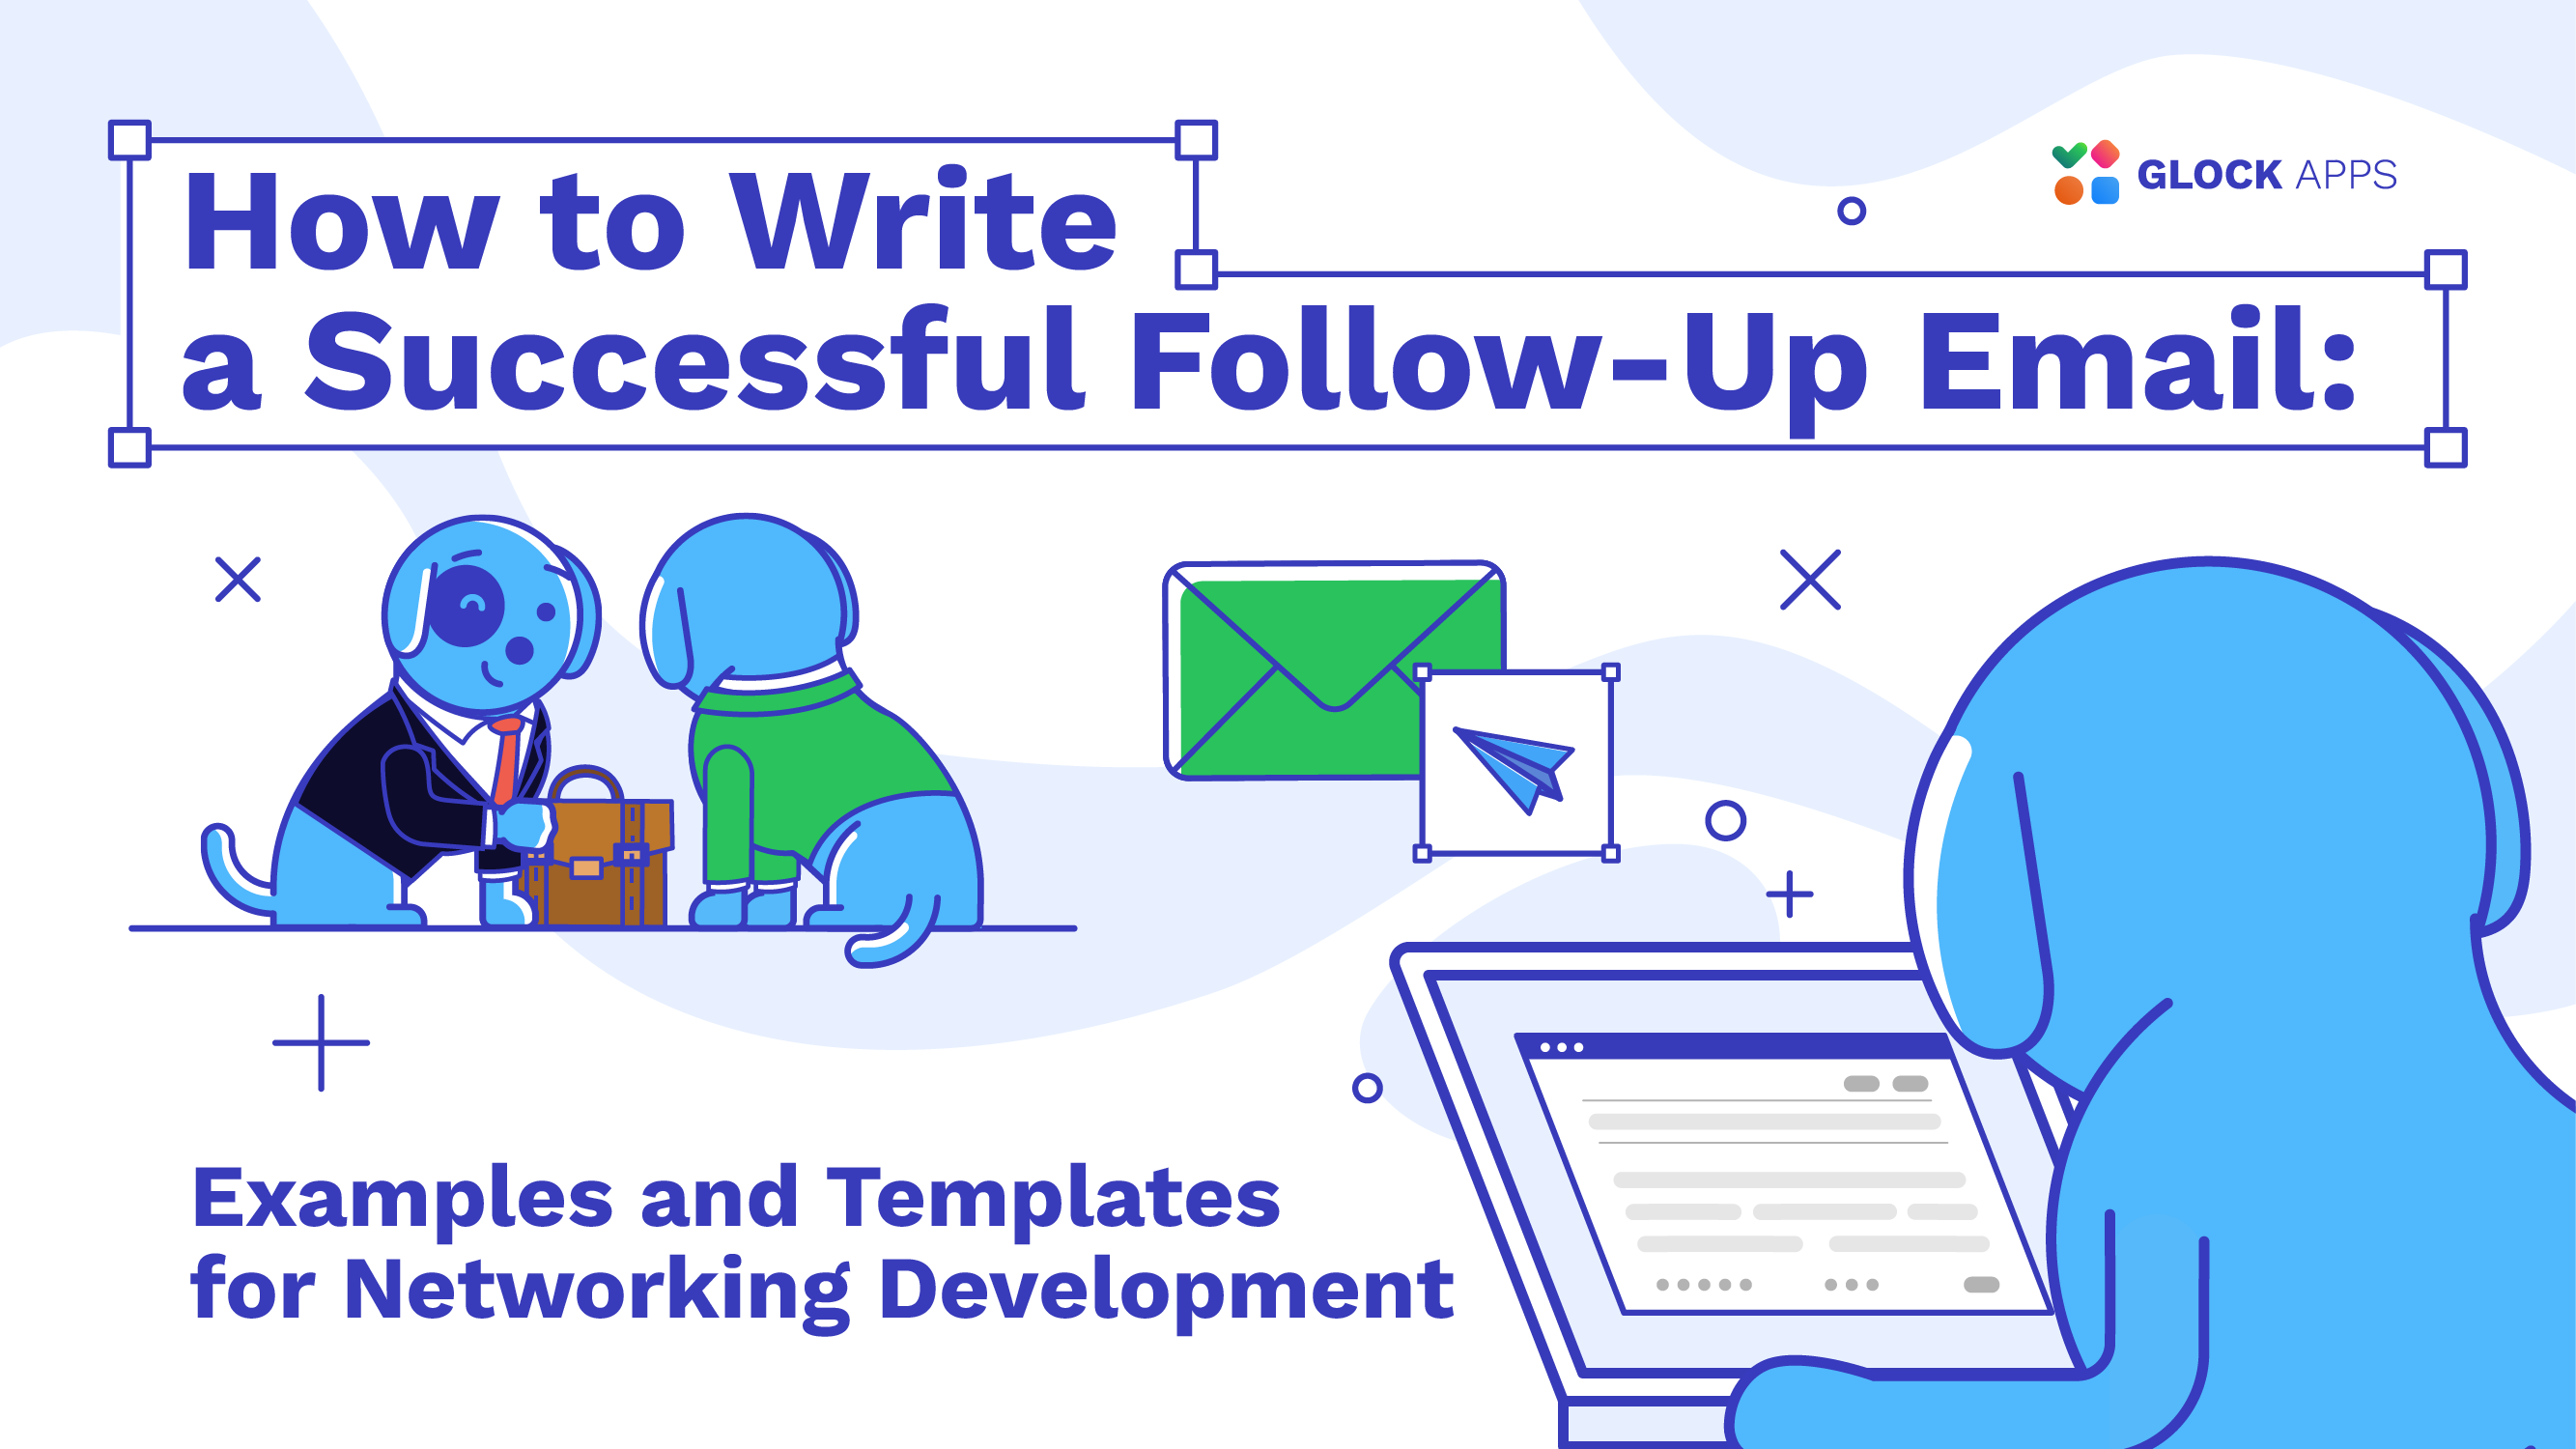 How to Write a Successful Follow-Up Email